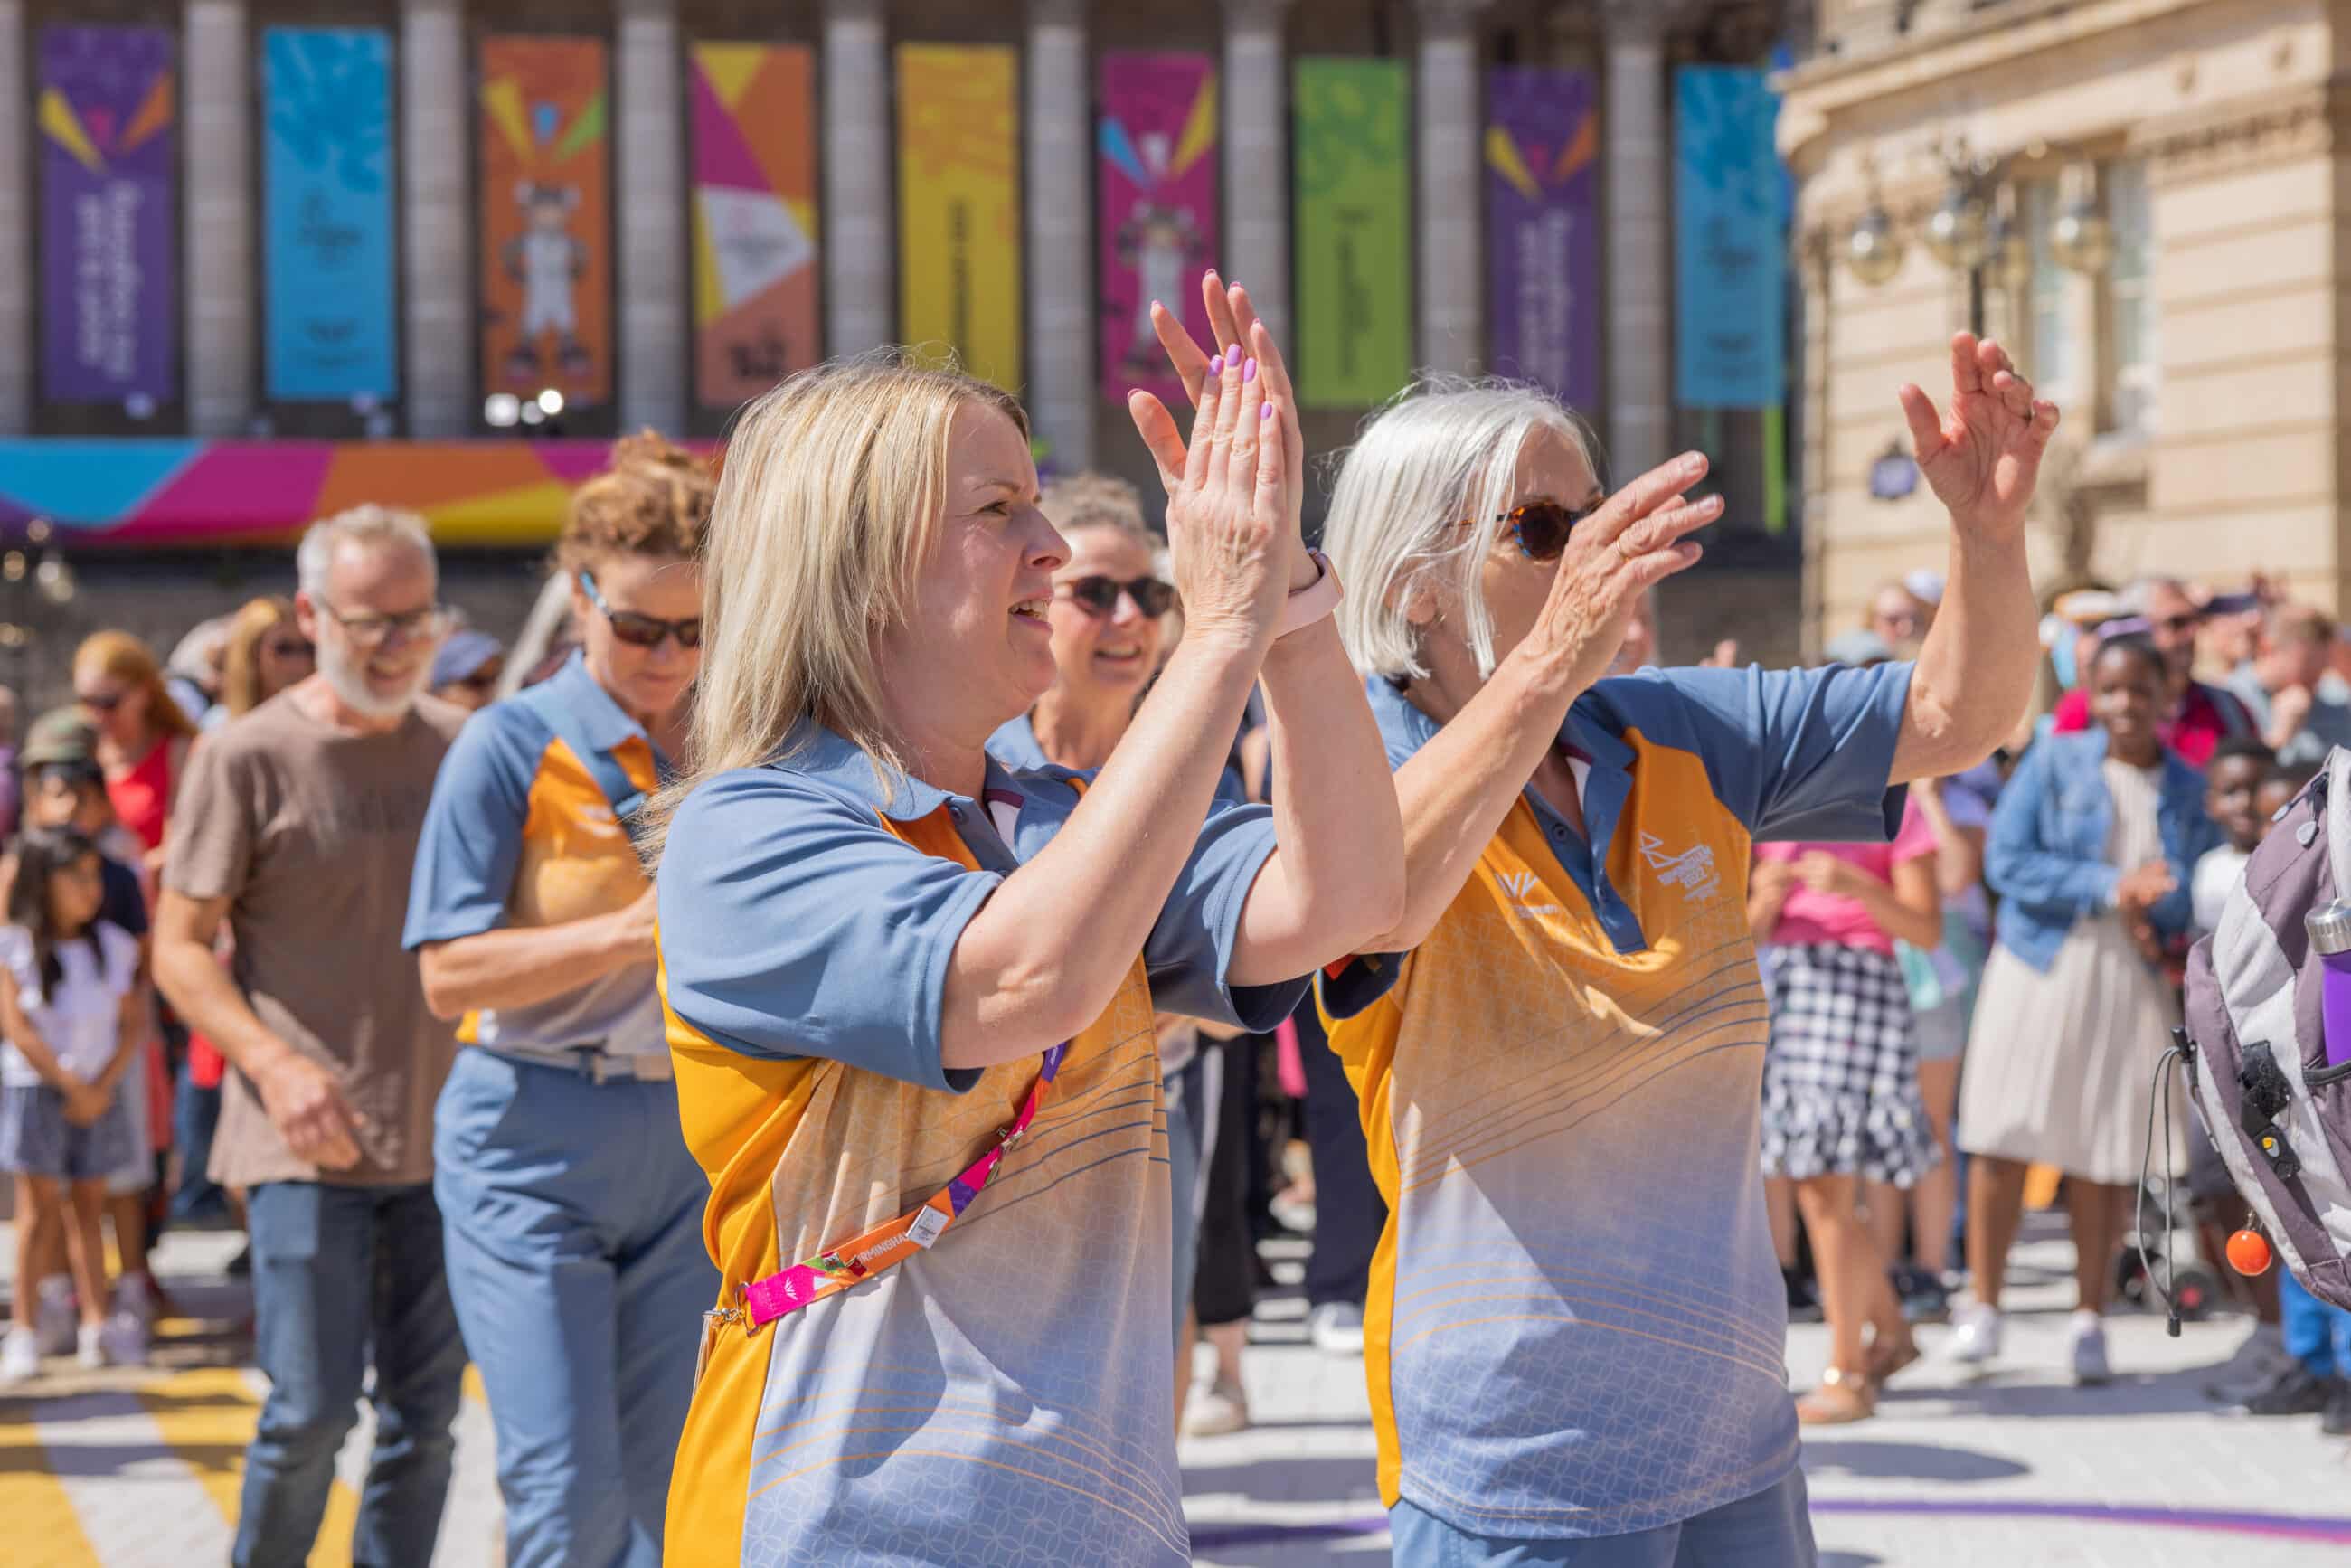 Two volunteers in orange and blue uniforms dance in Victoria Square during the Birmingham 2022 Commonwealth Games.